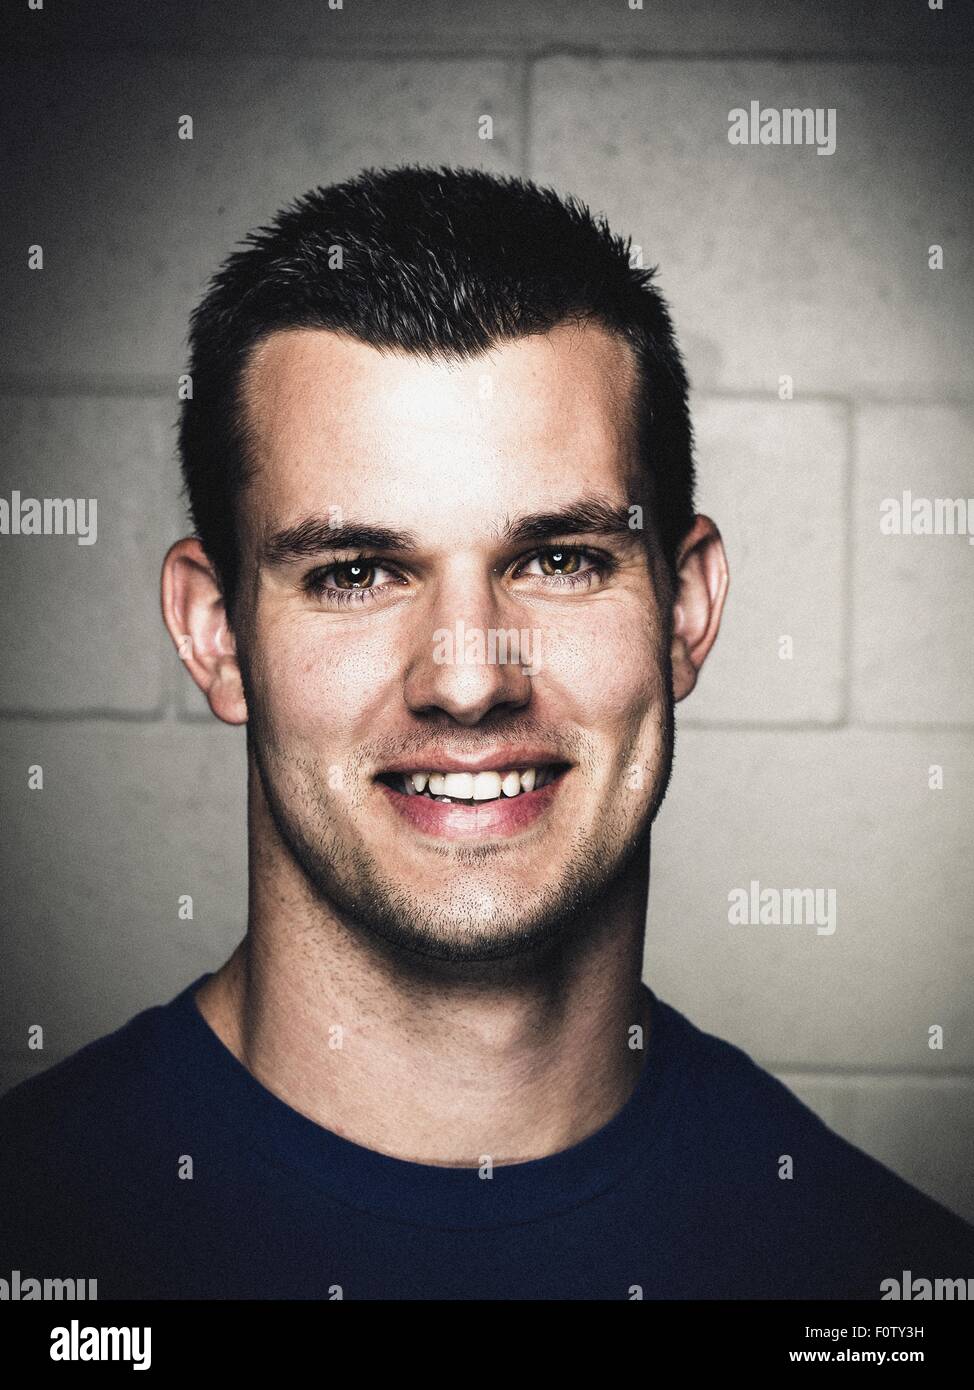 Portrait of smiling young man before workout Stock Photo